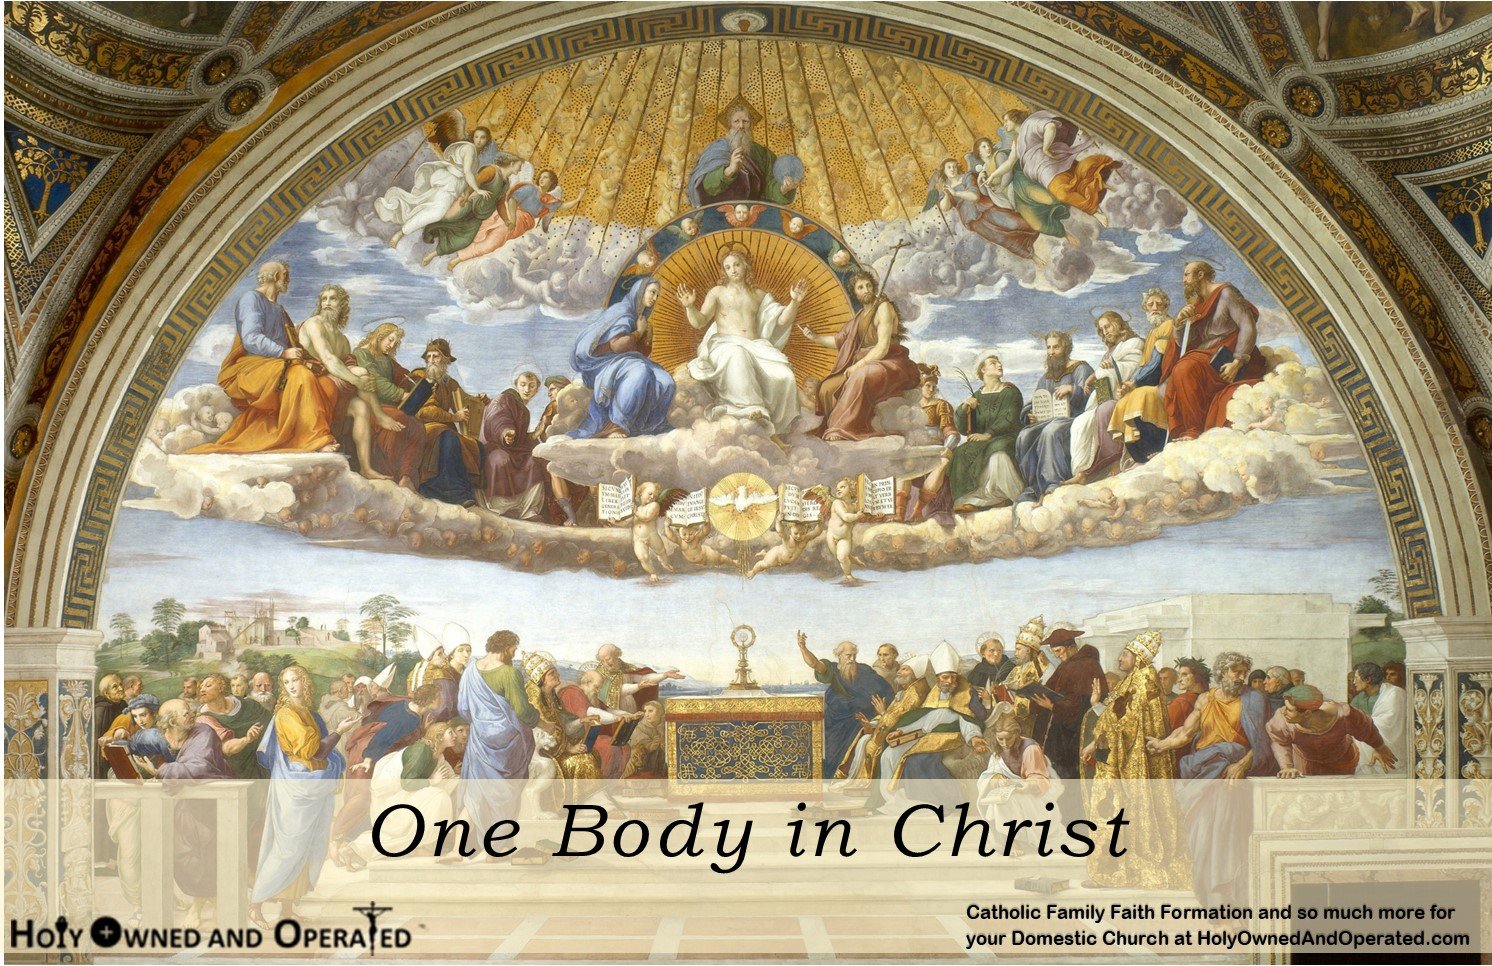 Raphael's Disputation of the Eucharist overlayed with the words One Body in Christ across the bottom as a banner.